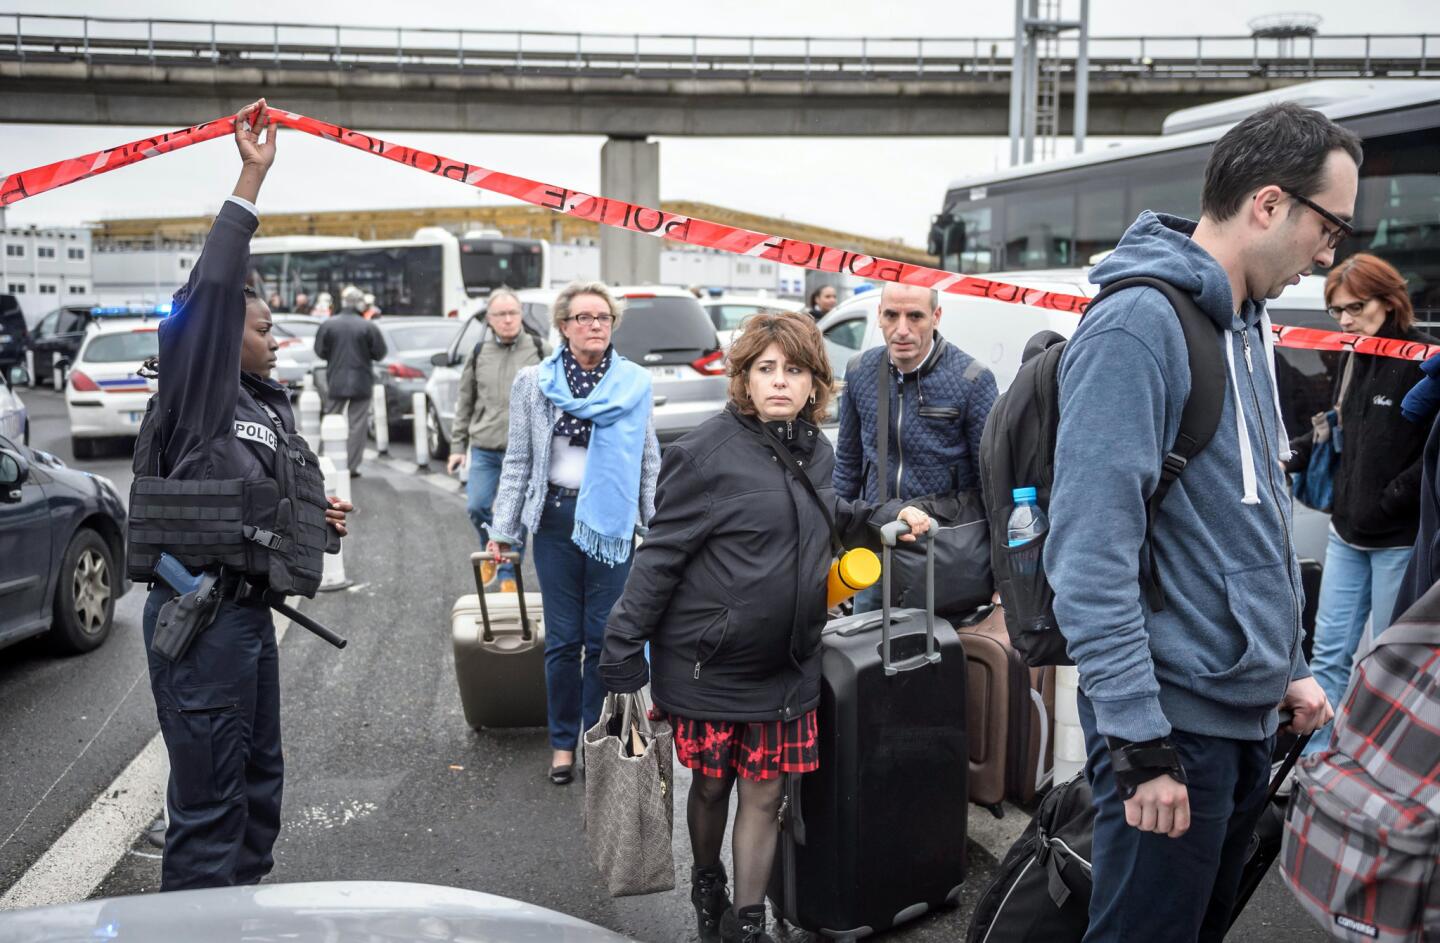 Orly airport evacuated